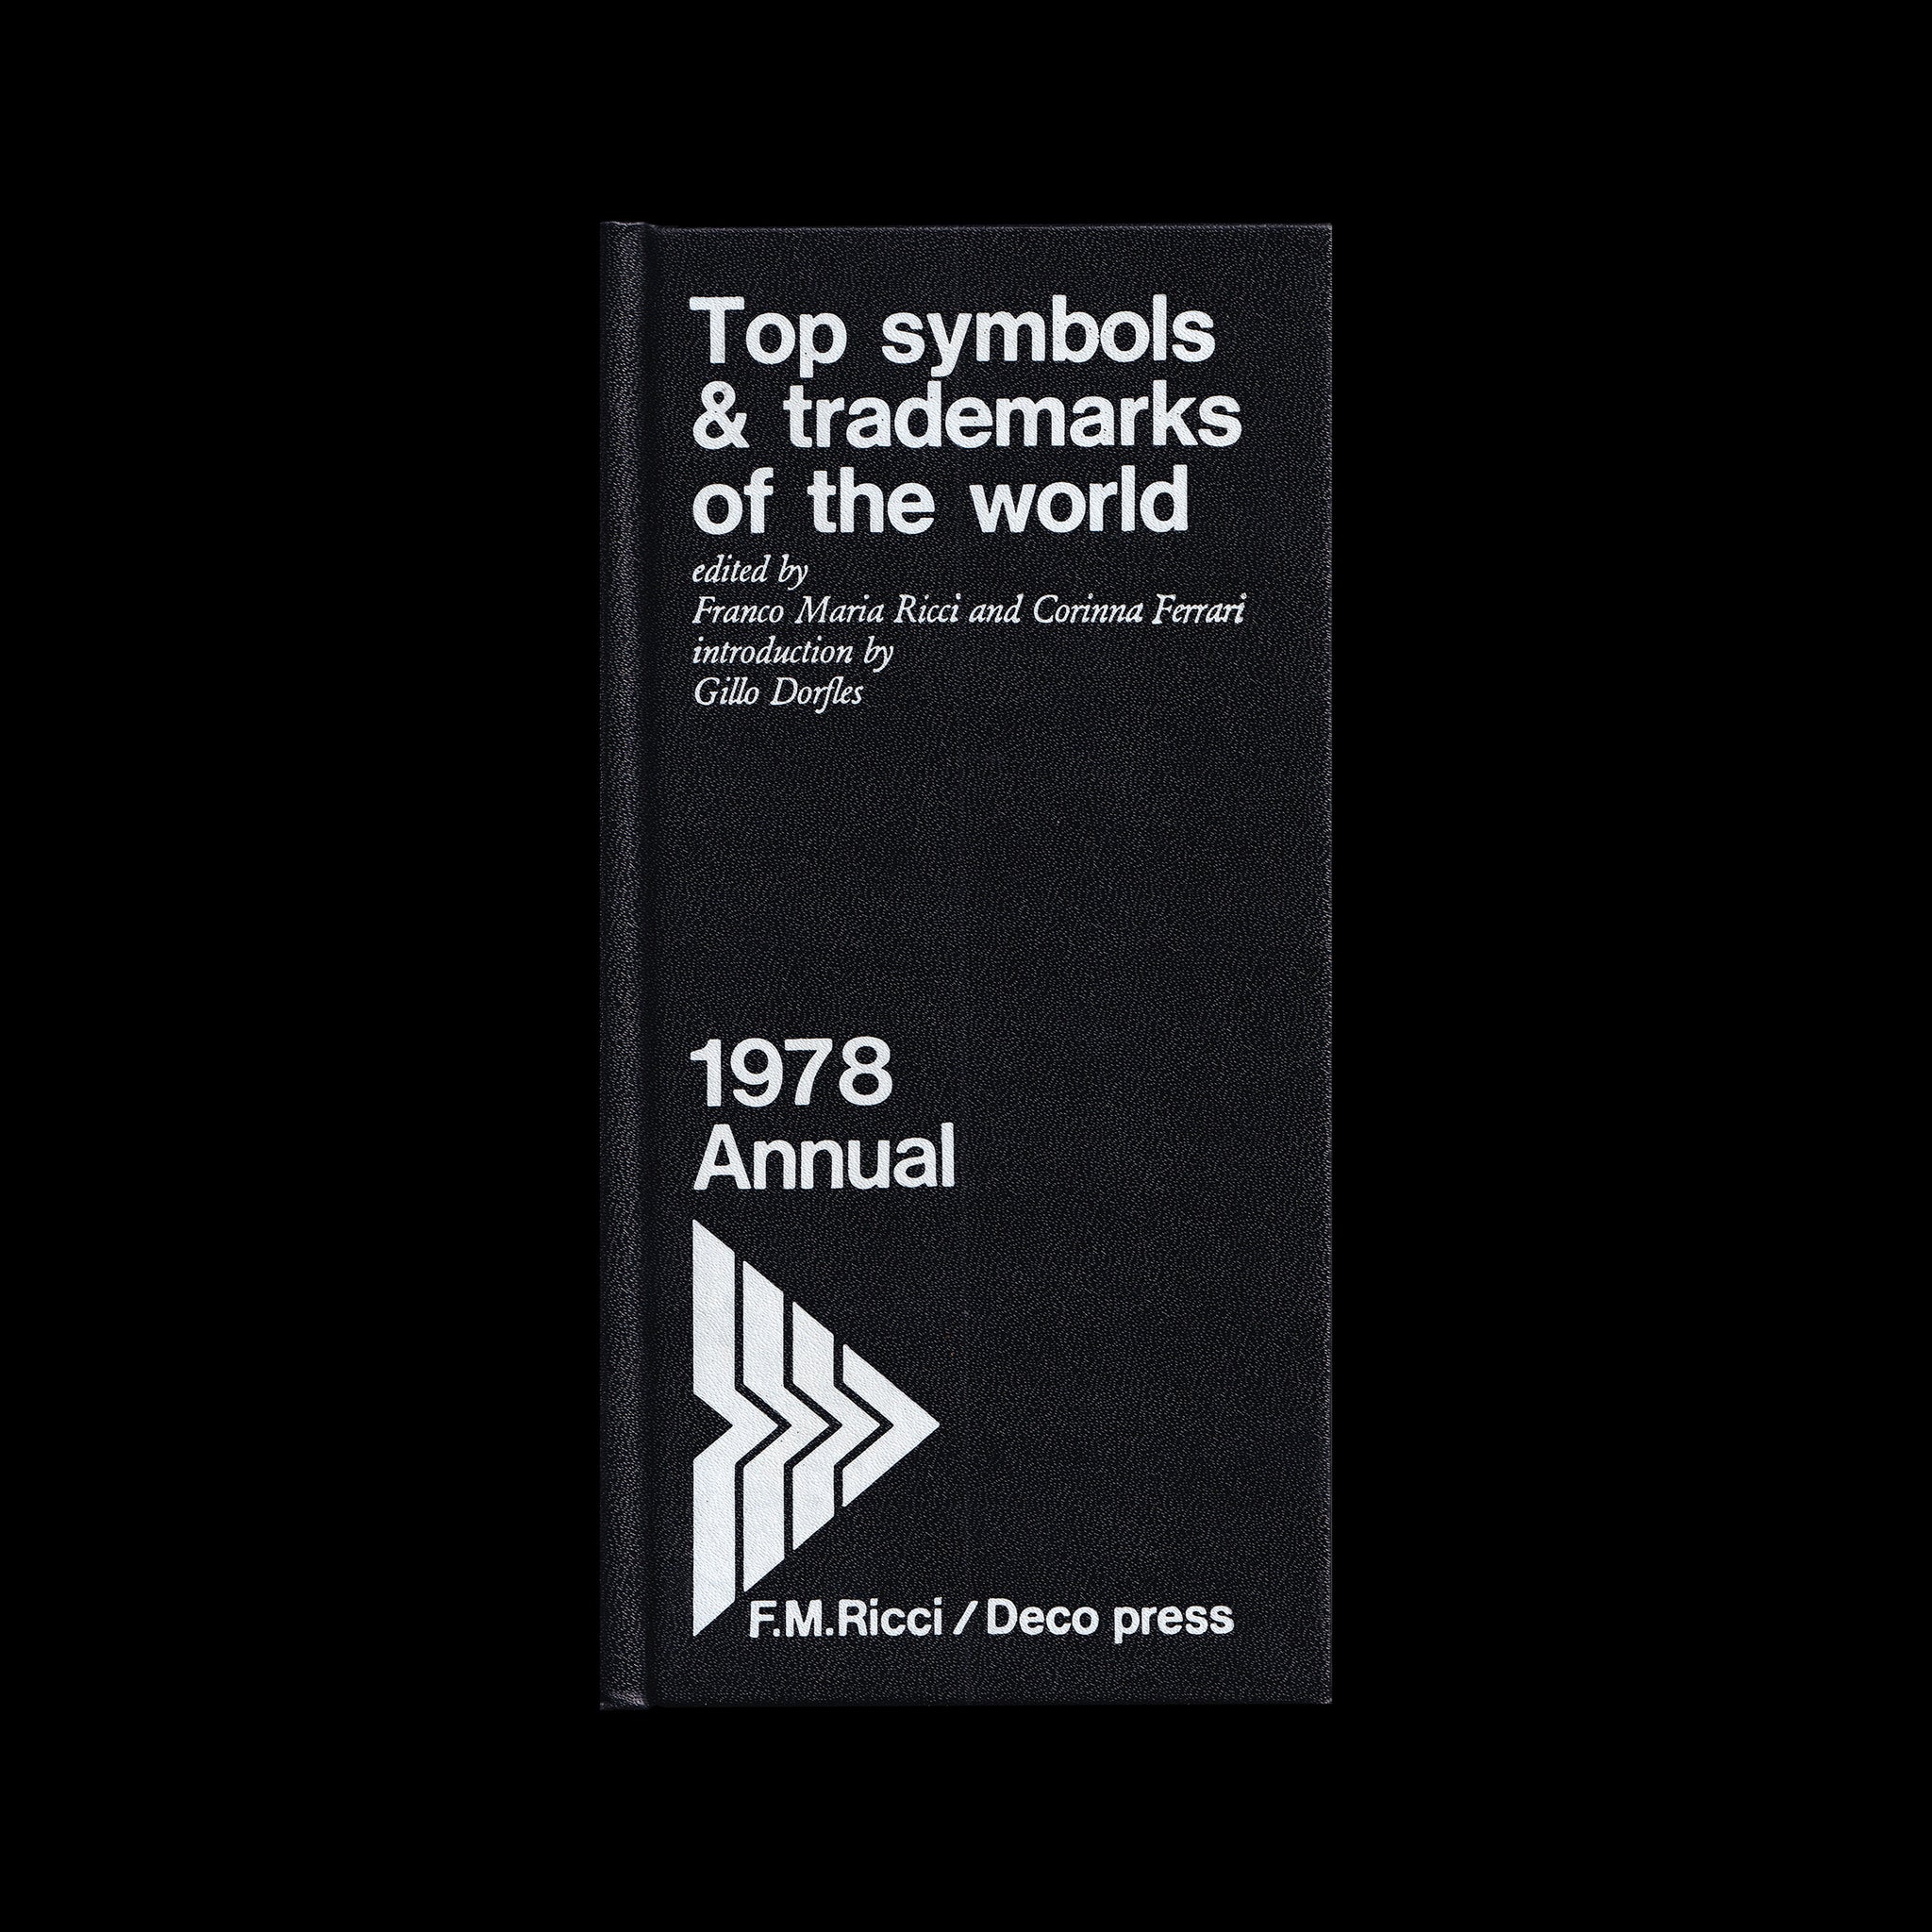 Top Symbols & Trademarks of the World, Volume 9, 1978 Annual